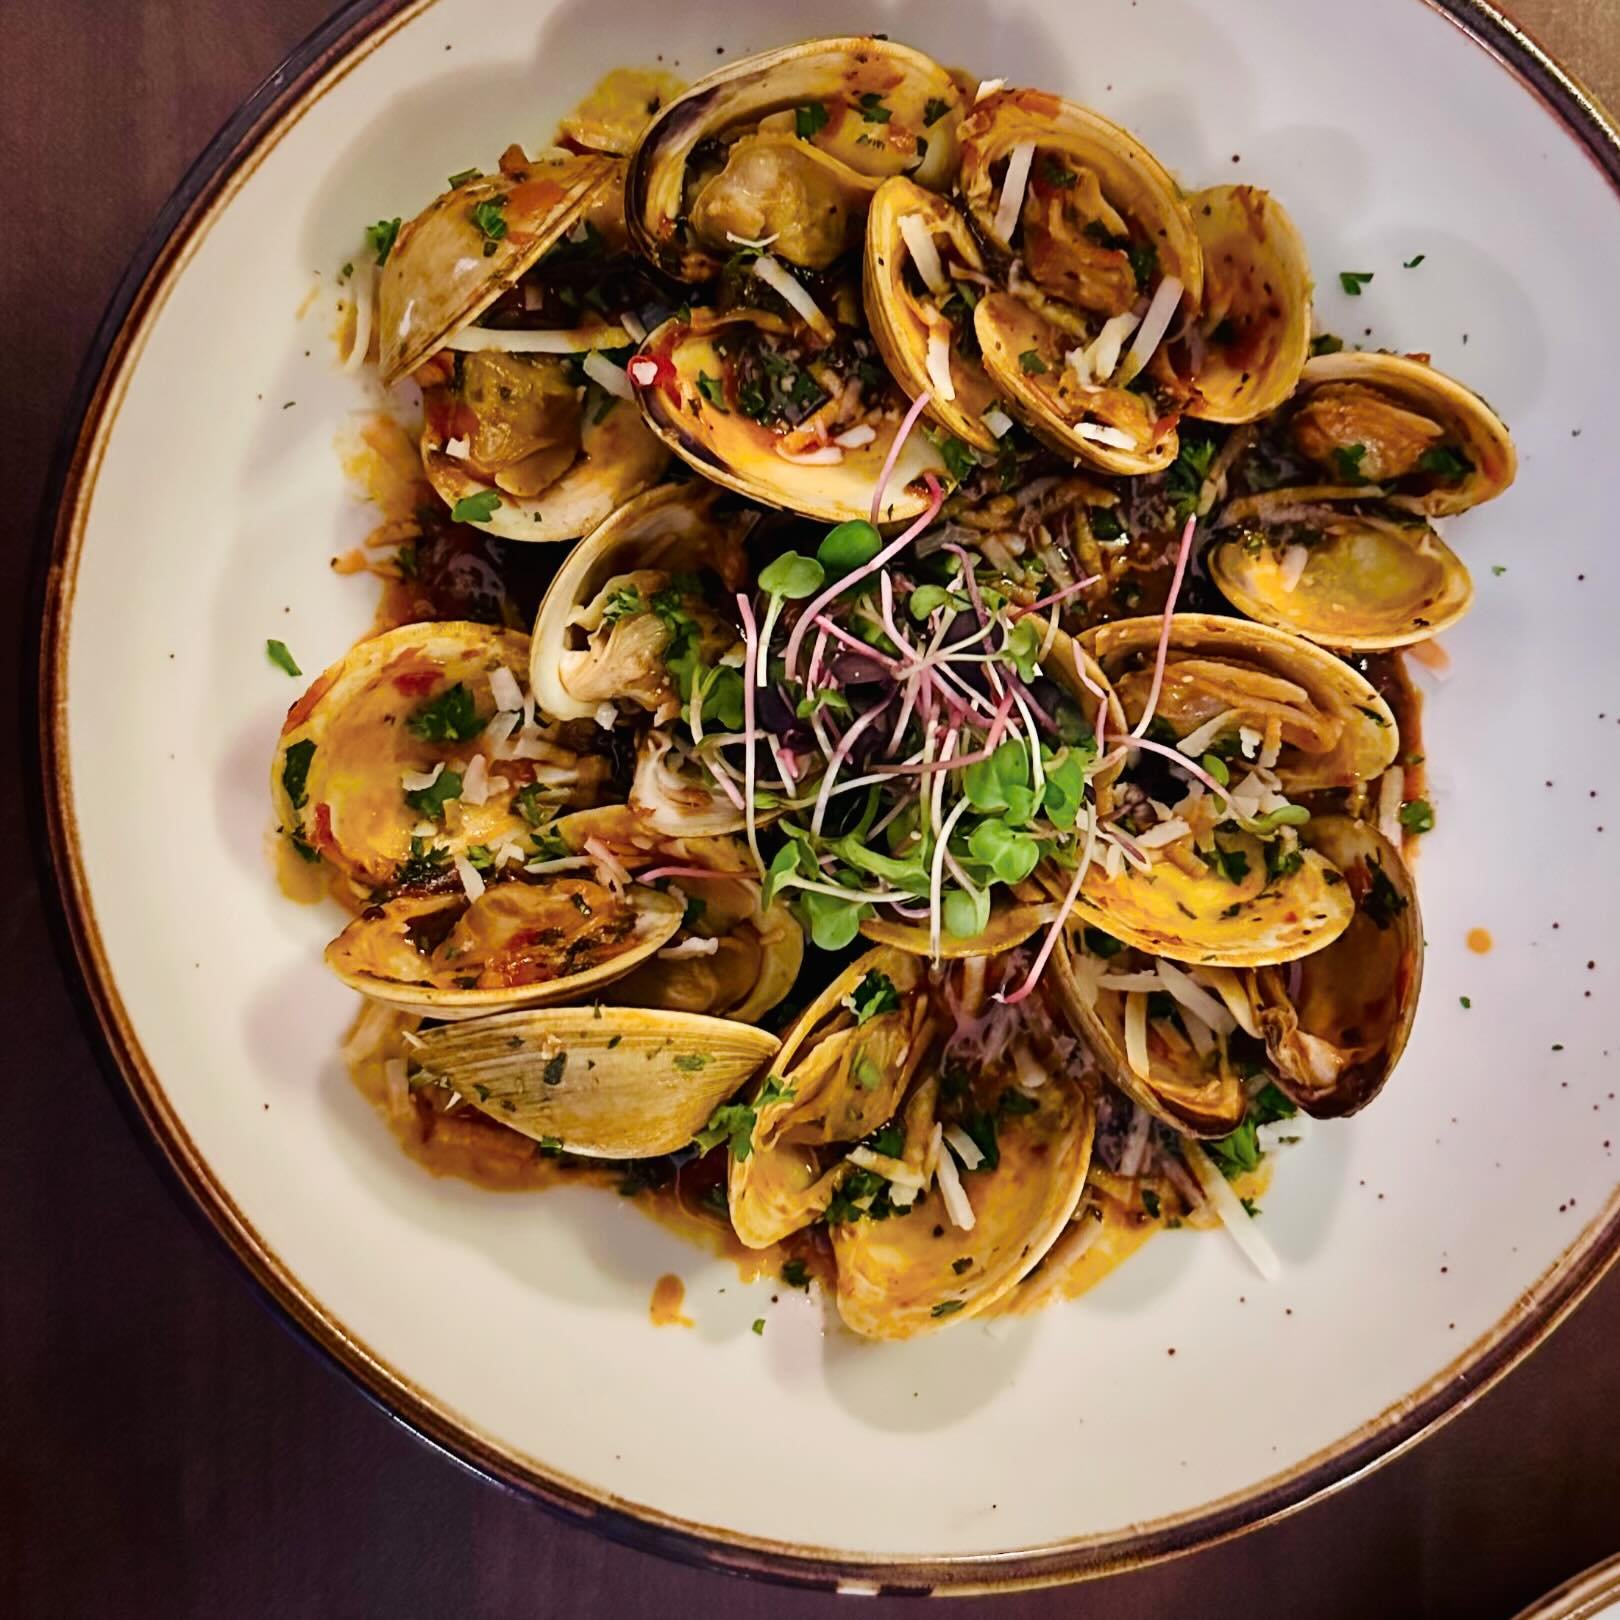 Dive into Tuesday nights at Powerhouse Eatery! 🍽️💥 Enjoy our $1 Clam Night paired with $1 domestic drafts 🍺. 

🗓️ Every Tuesday from 4-9 PM